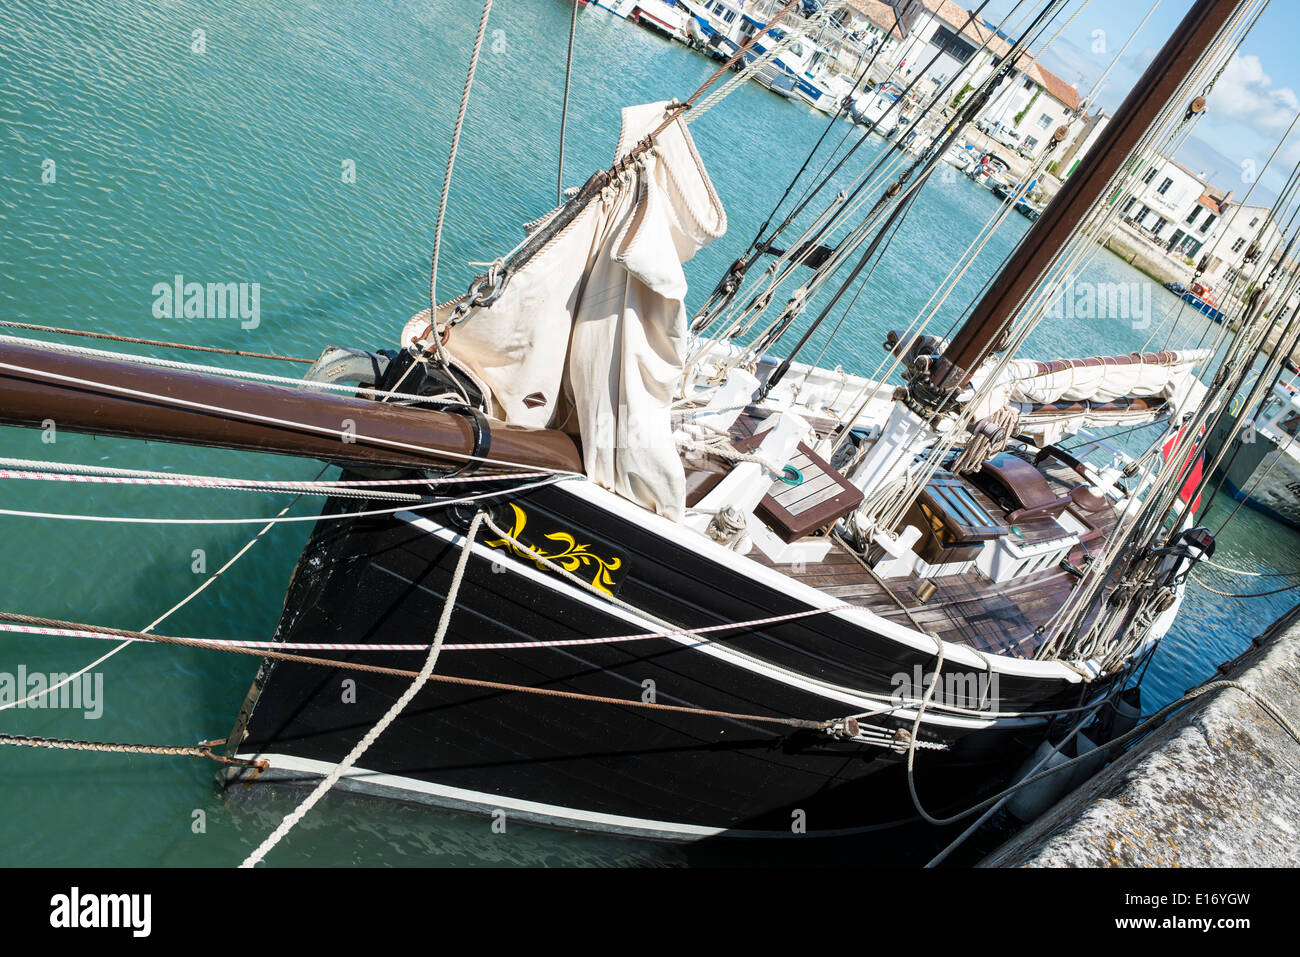 Pilot cutter tied up at St Martin, Ile de Re, France Stock Photo